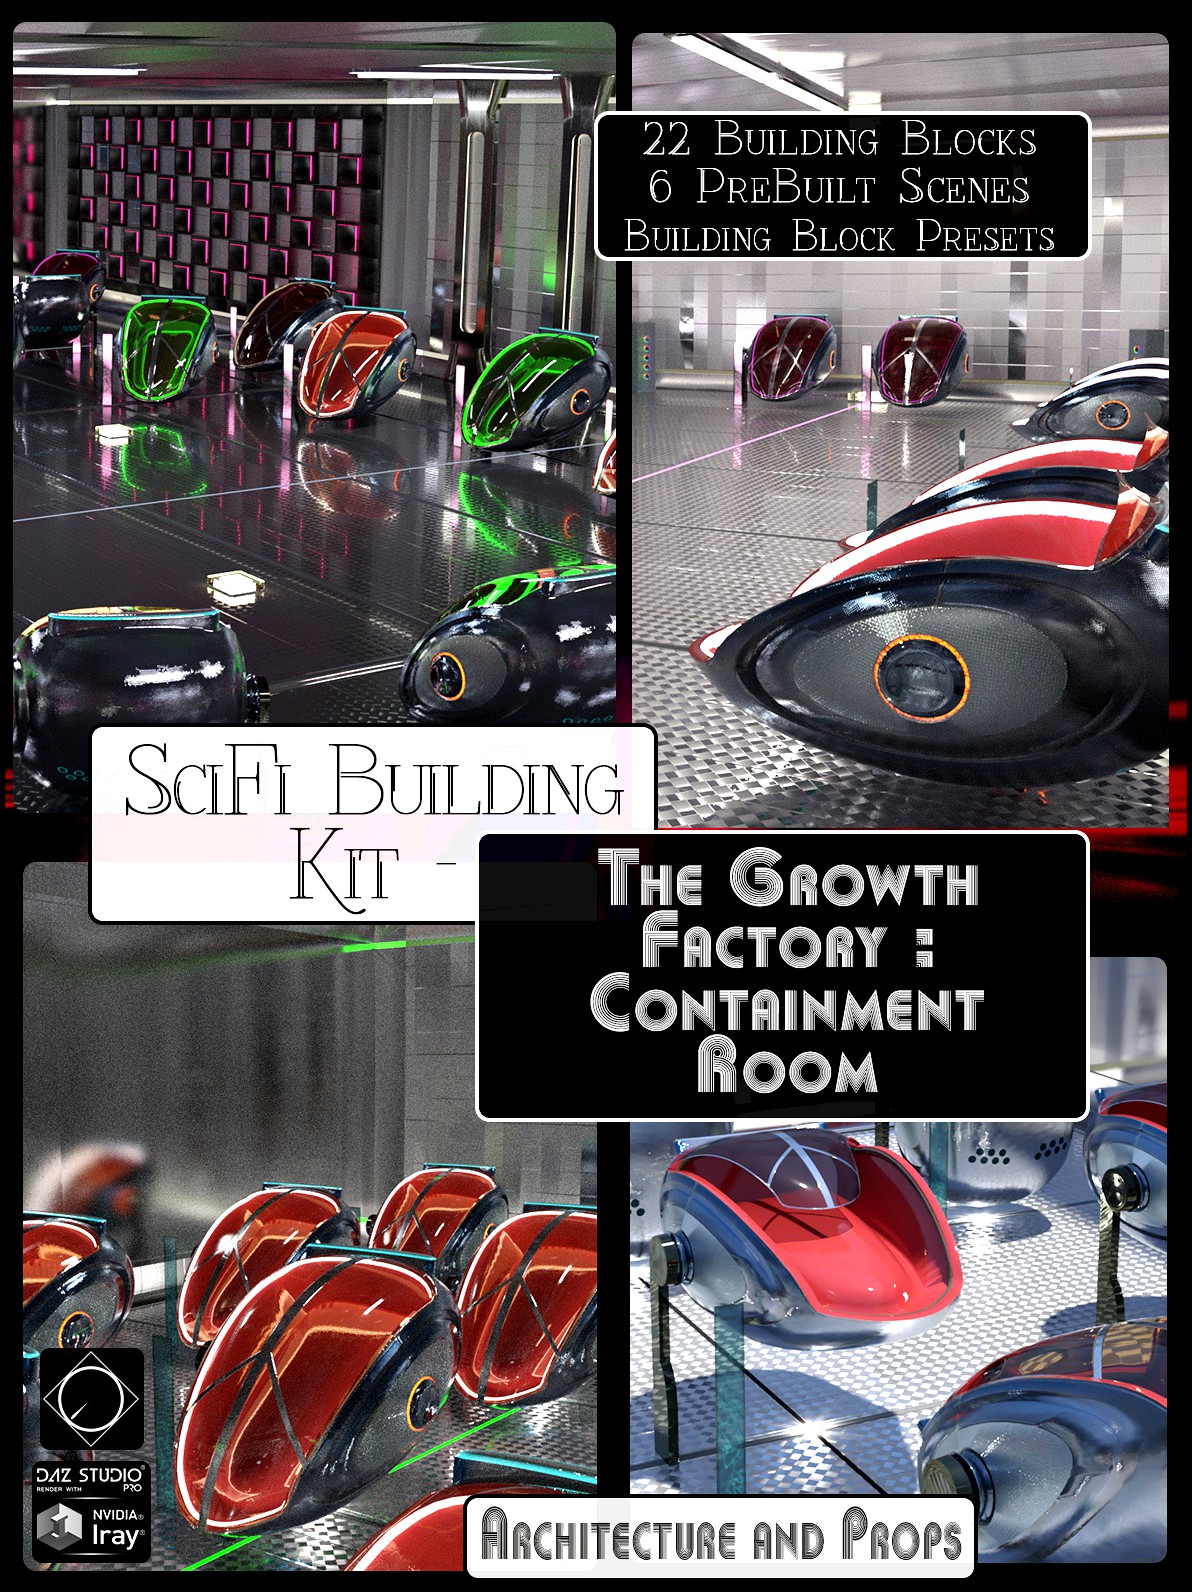 Sci Fi Building Kit - The Growth Factory: Containment Room